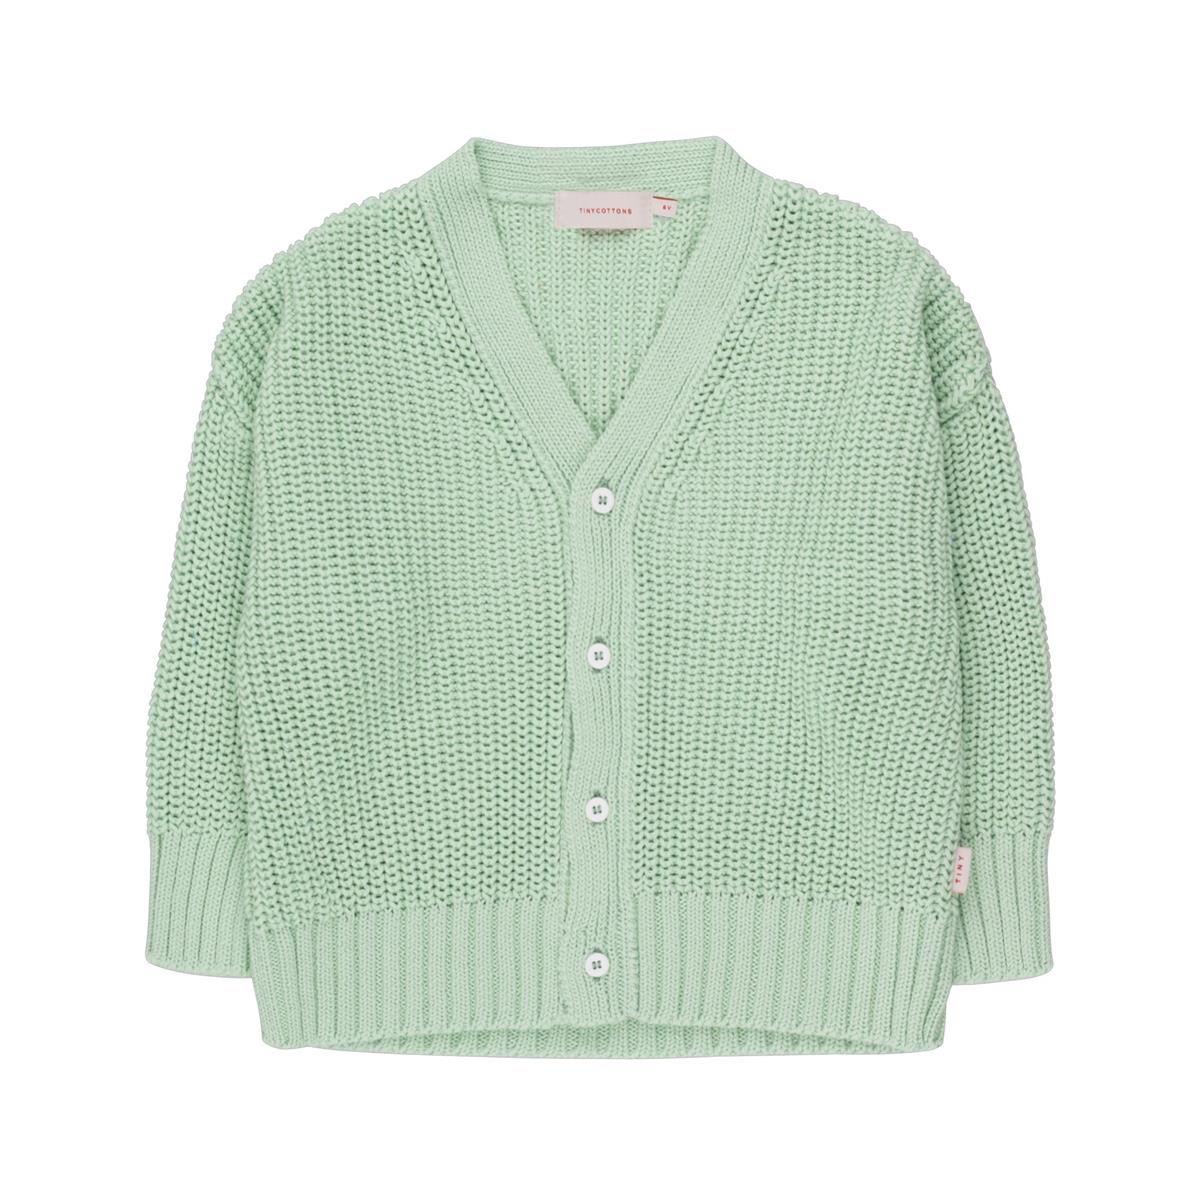 Tinycotttons - SOLID CARDIGAN pastel green